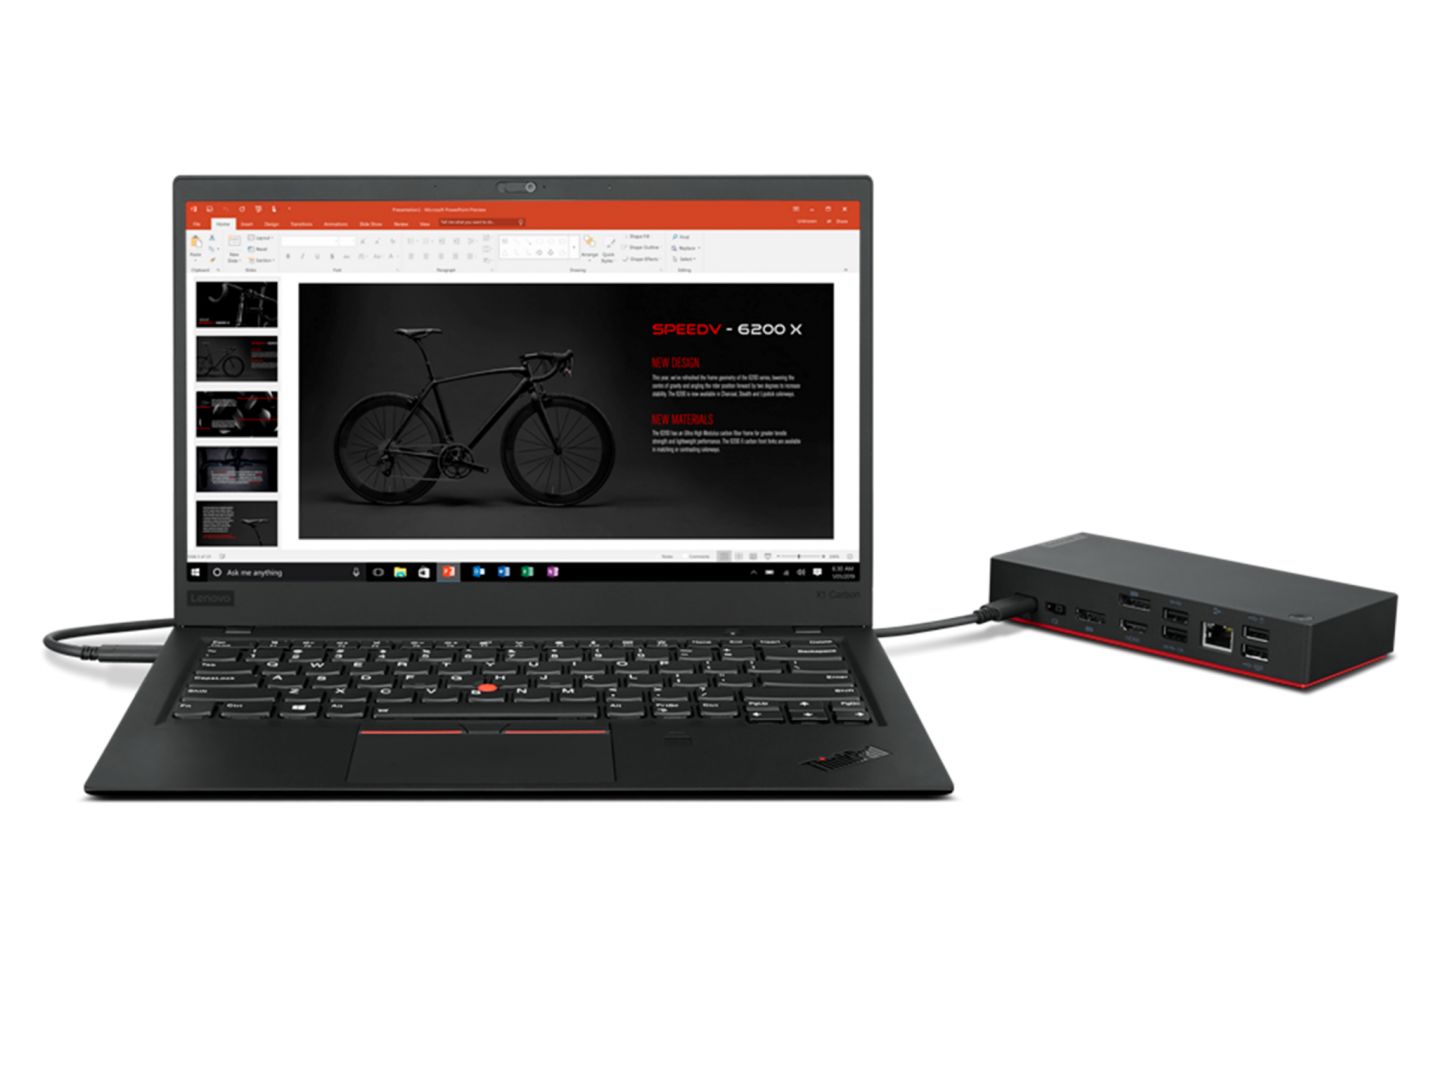 Lenovo USB-C Dock (Windows Only), Video Ports: 2 x Display Port,1 x HDMI Port, Output Power: 65W with 90W power adapter connected_4